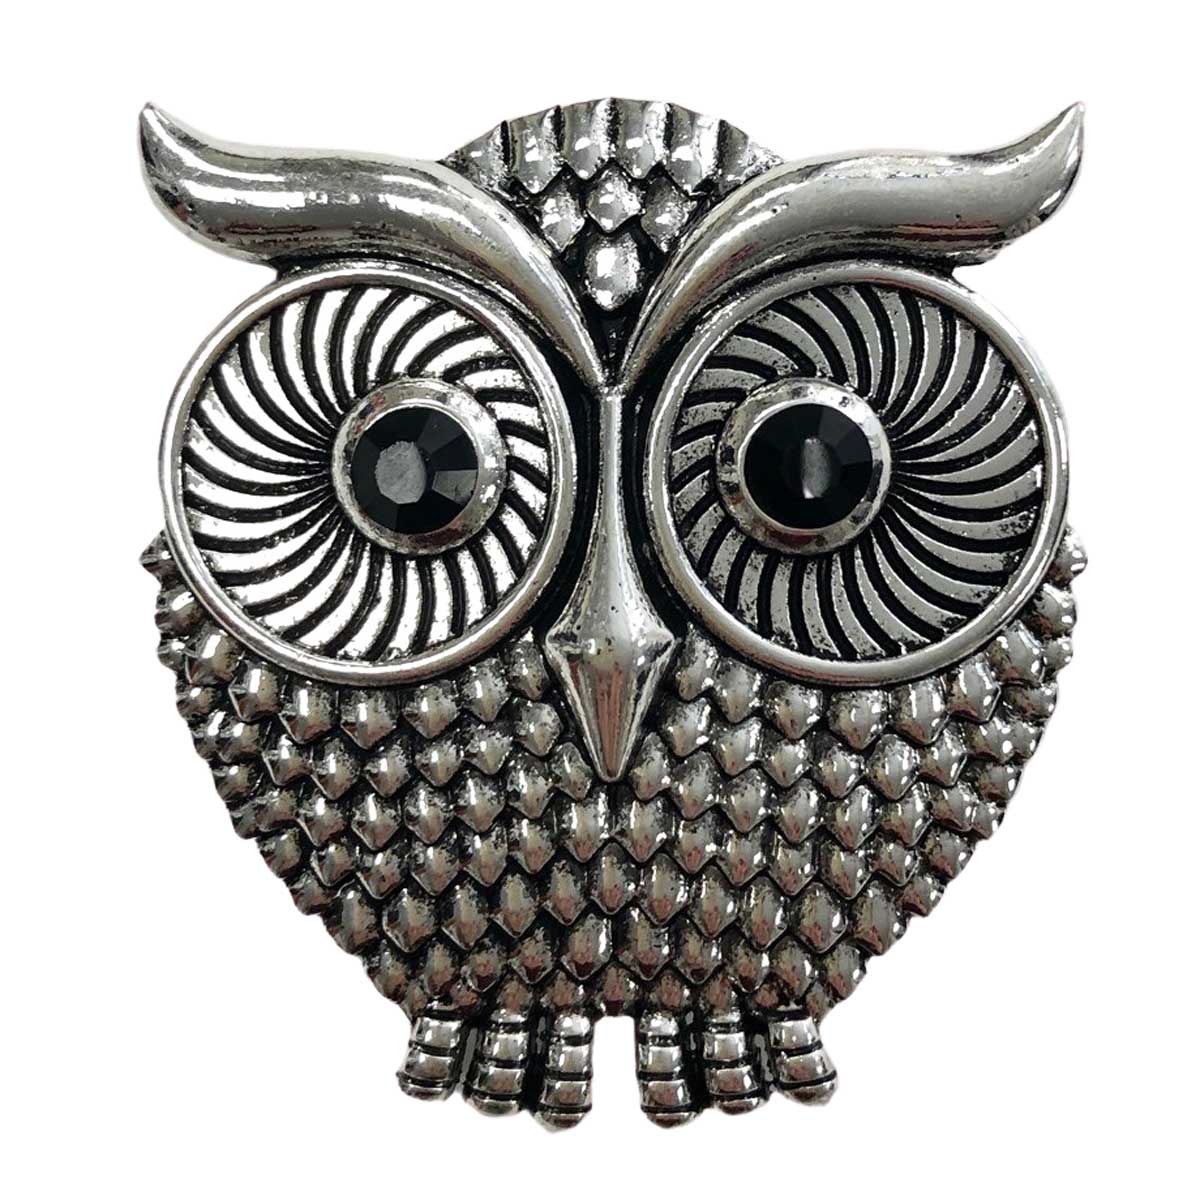 Large eyed wise owl. Magnetic Brooch for Scarves Artistic Sculptural shapes add a personality to absolutely anything you wish to put your stamp on! The Super Strong Magnet is enough for a jacket lapel! Use to hold a sarong or cardigan together.  Great to adorn a hat or to hold a scarf in place with Fabric Safe Magnet.